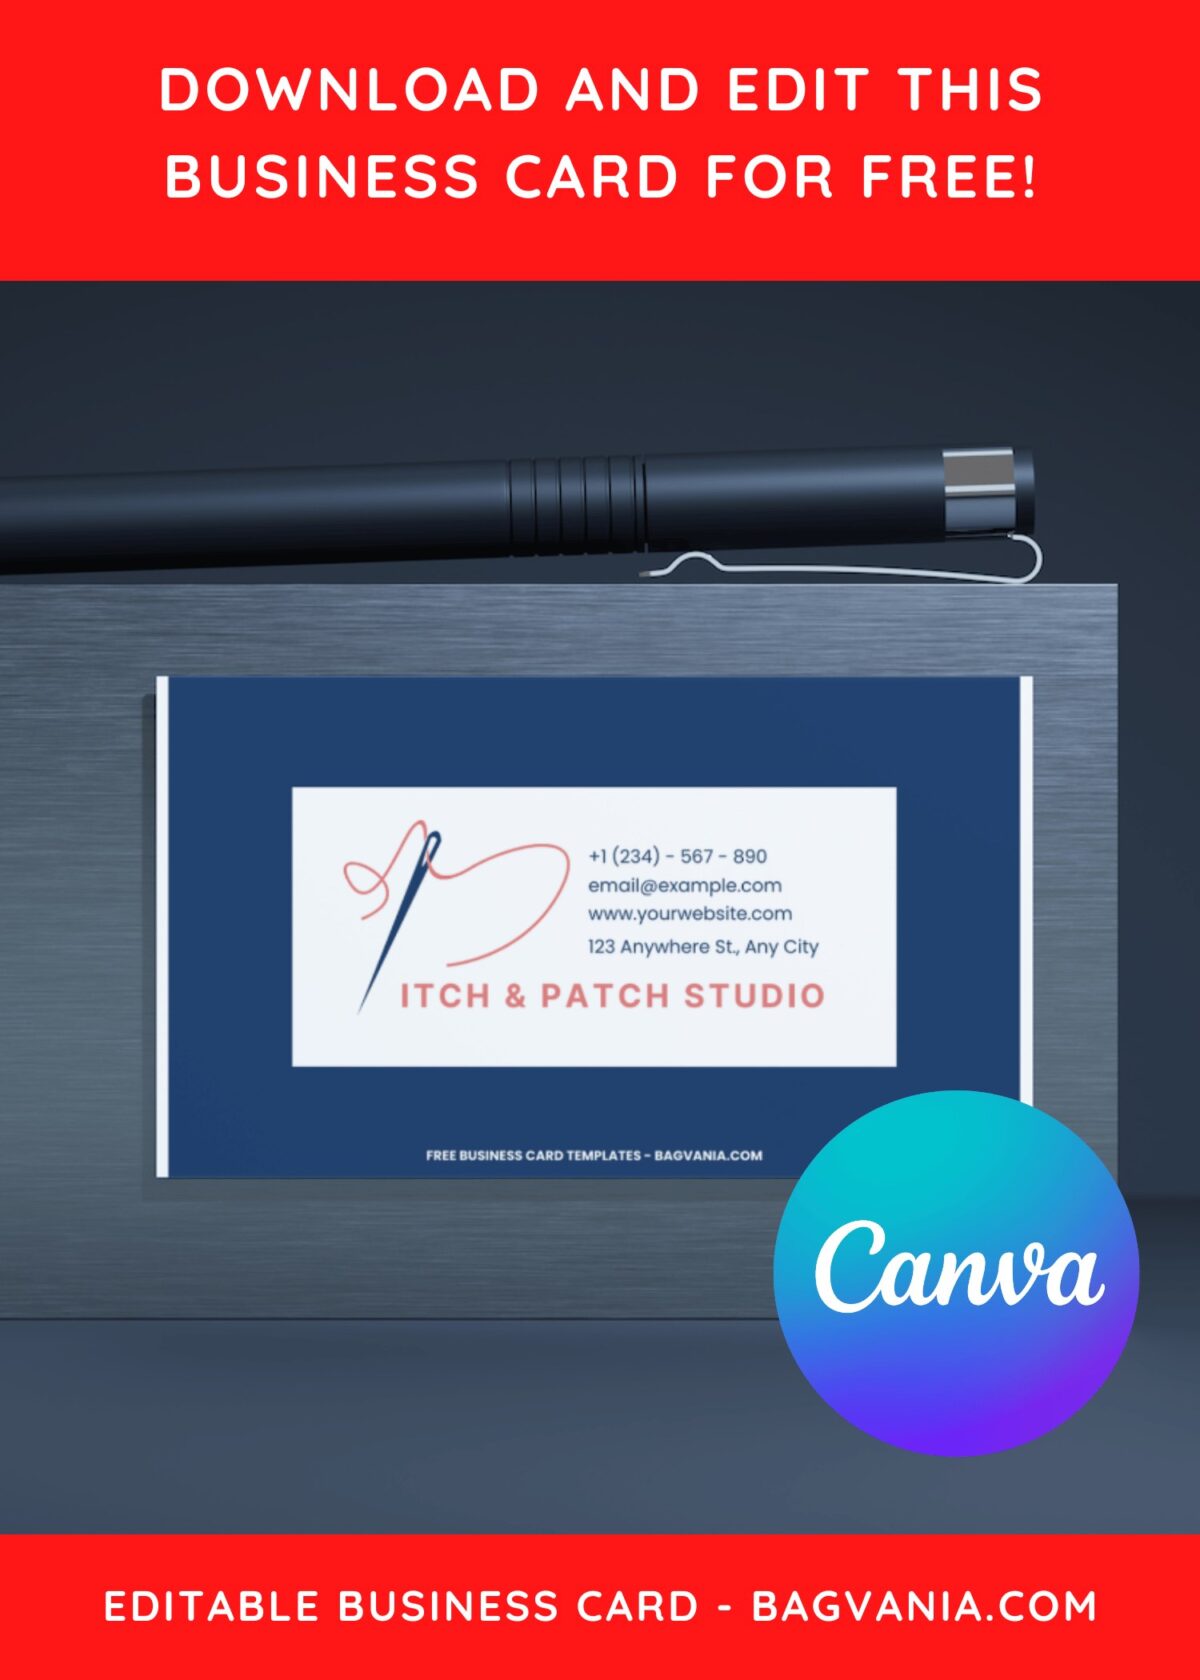 10+ Blue And White Accent Tailor Canva Business Card Templates E